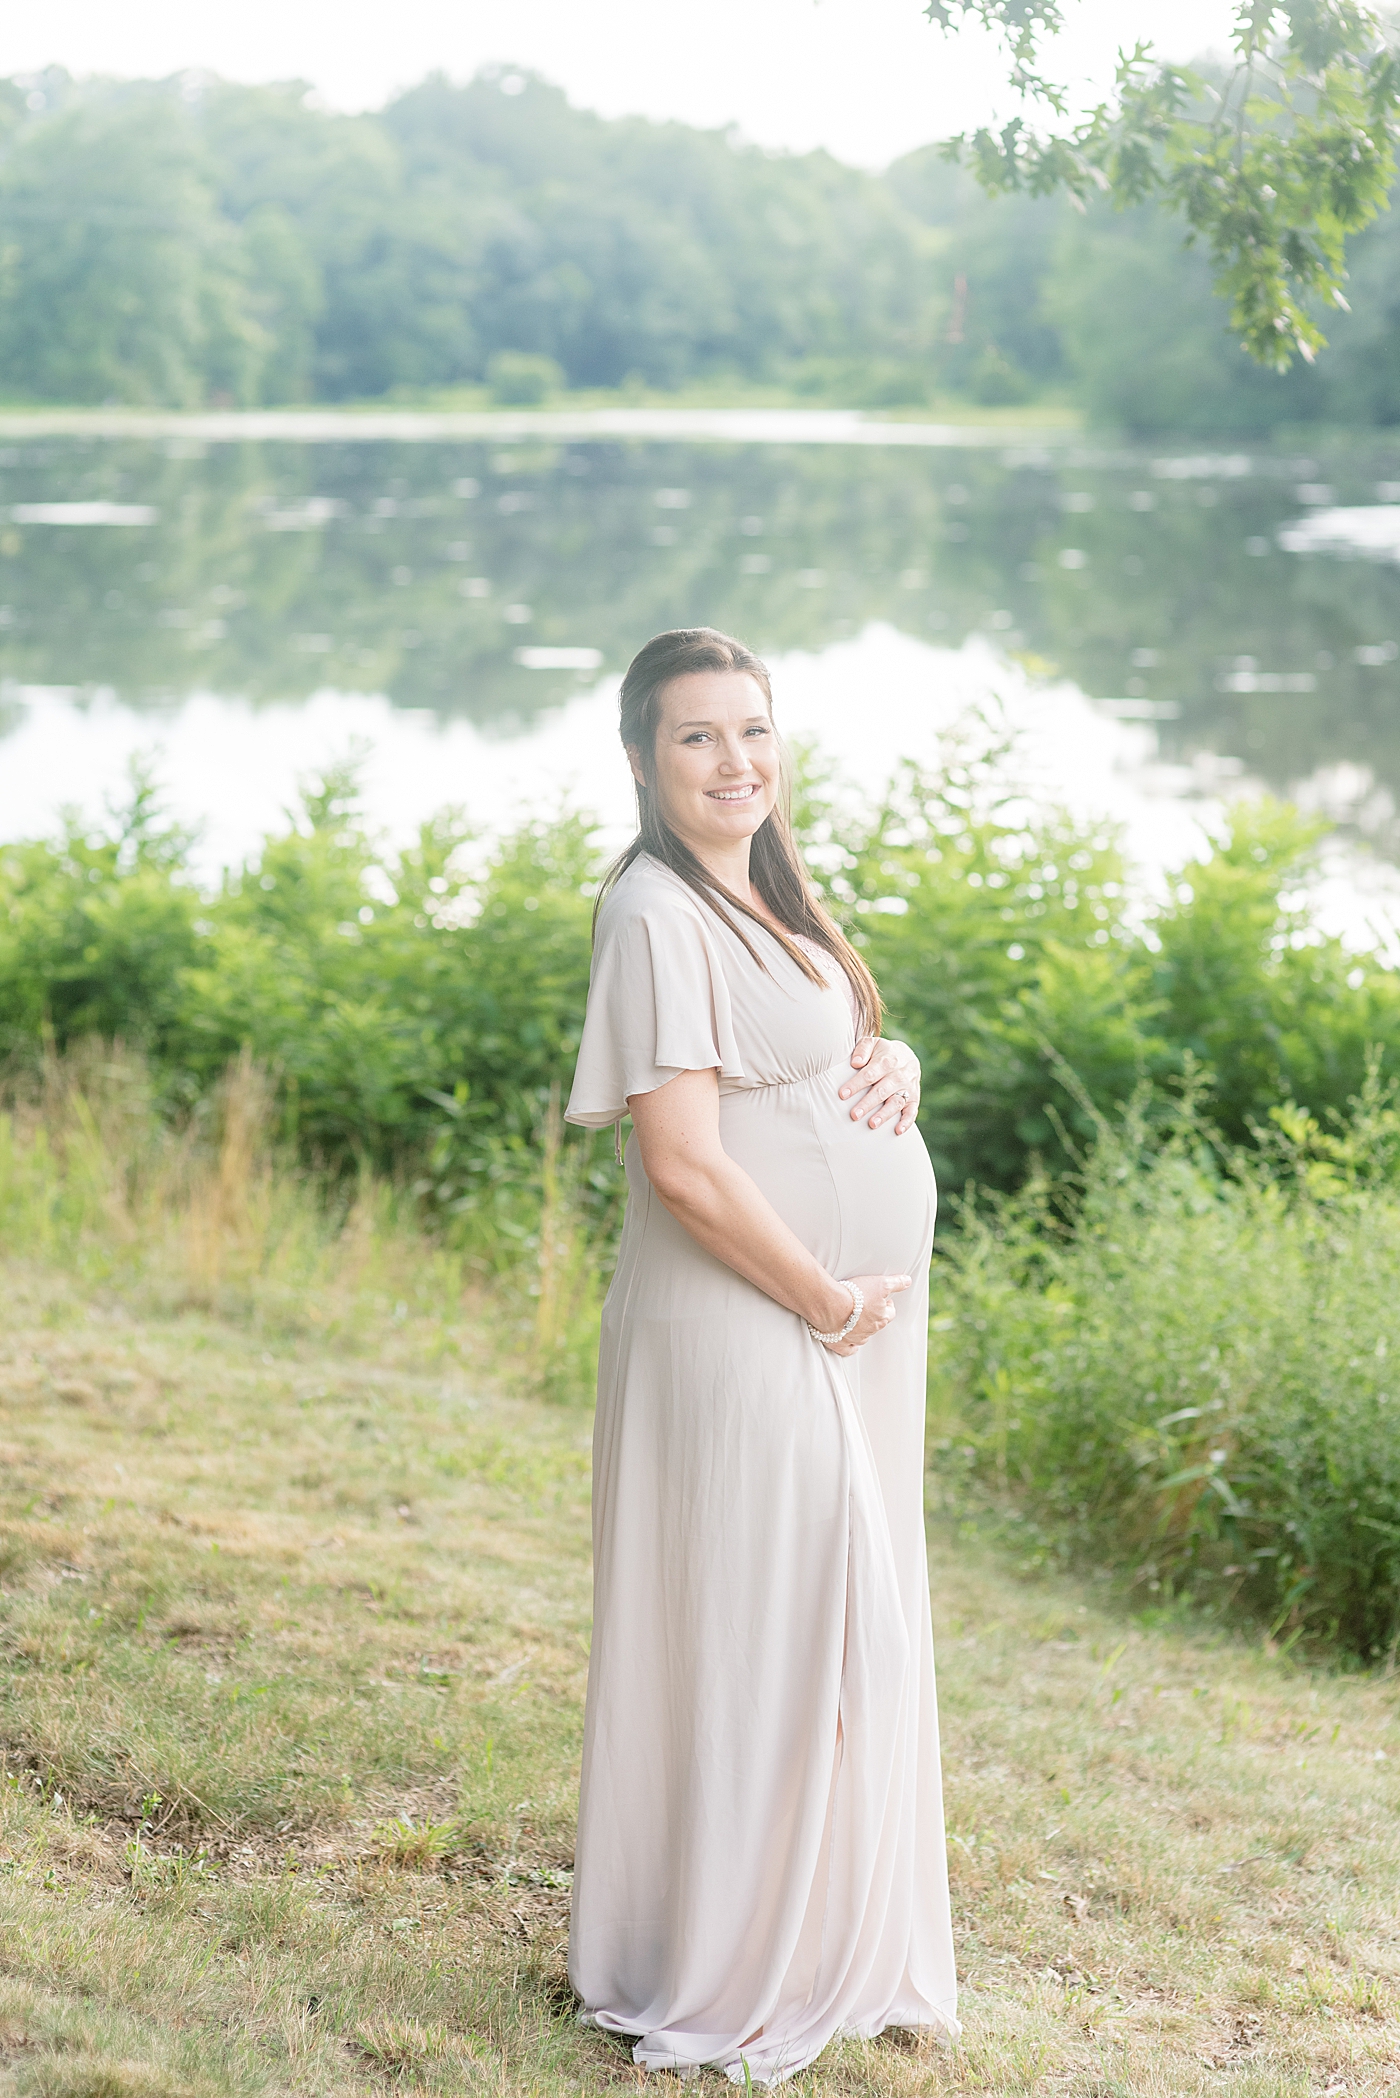 Mom to be in flowing dress in front of a pond | Photo by Anna Wisjo Photography